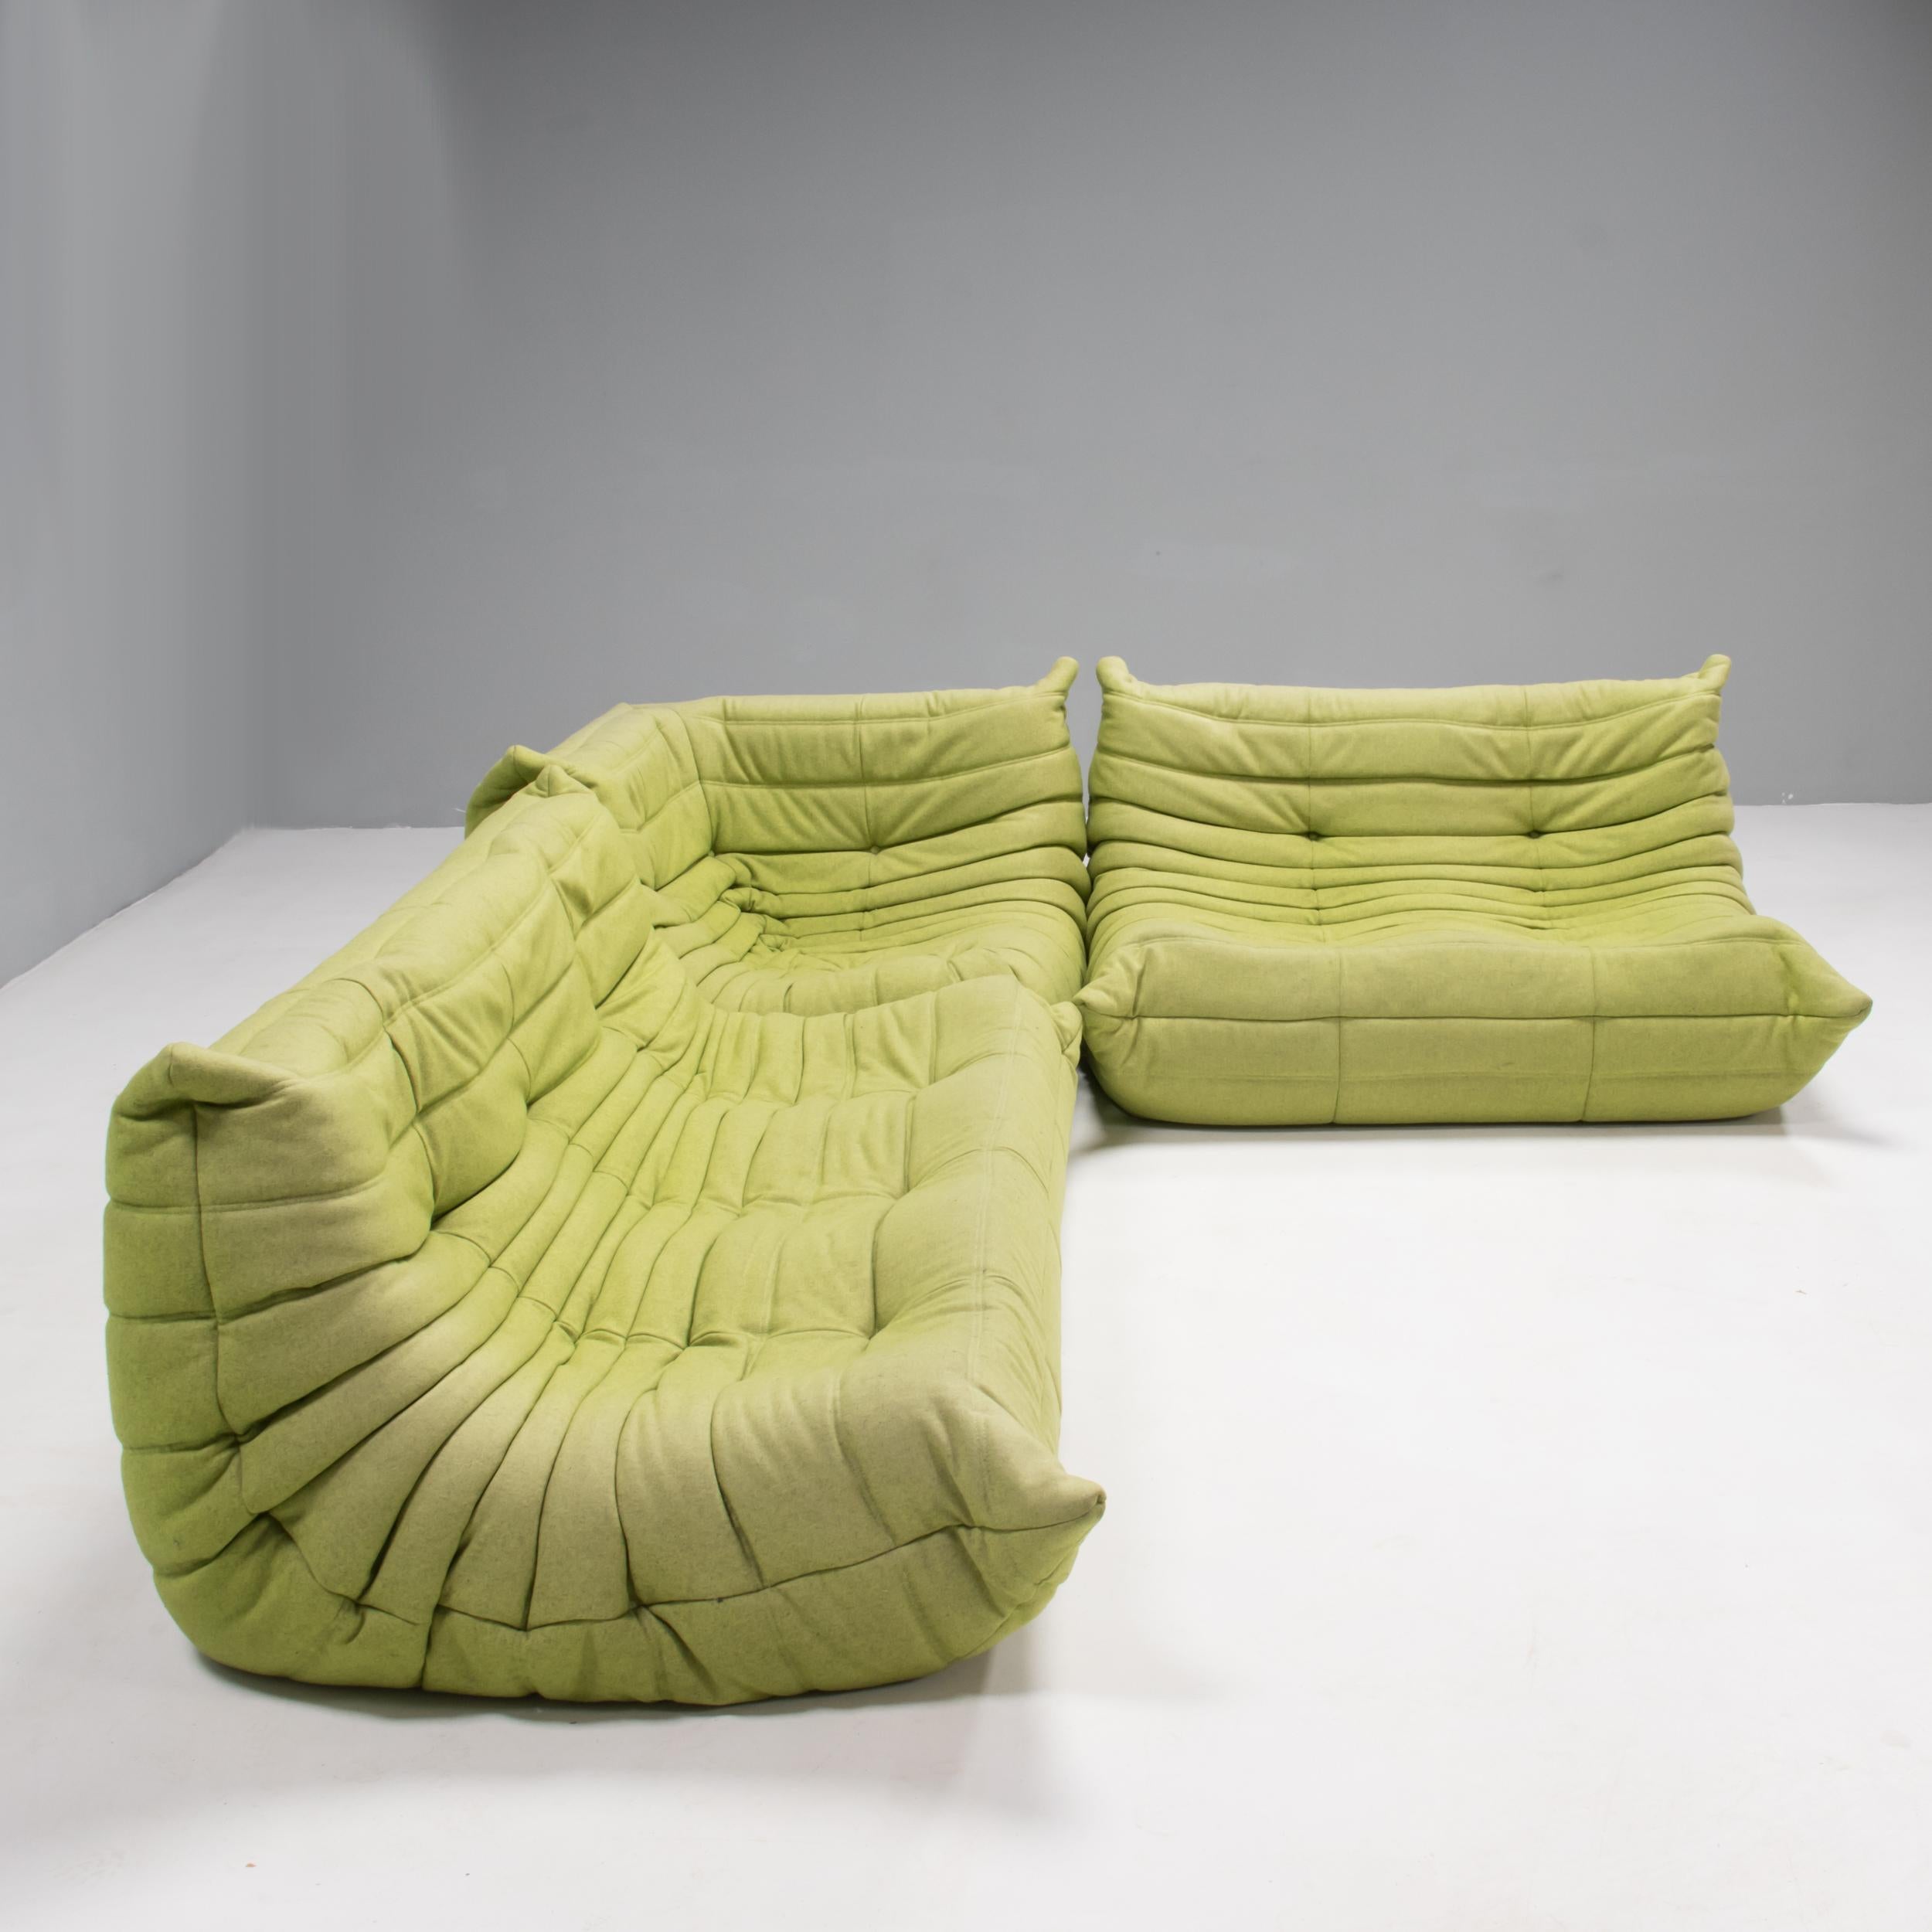 The iconic Togo sofa, originally designed by Michel Ducaroy for Ligne Roset in 1973, has become a design classic. 

These 2-seater sofa, 3 seater and corner are reupholstered in a textured lime green wool fabric and features the instantly